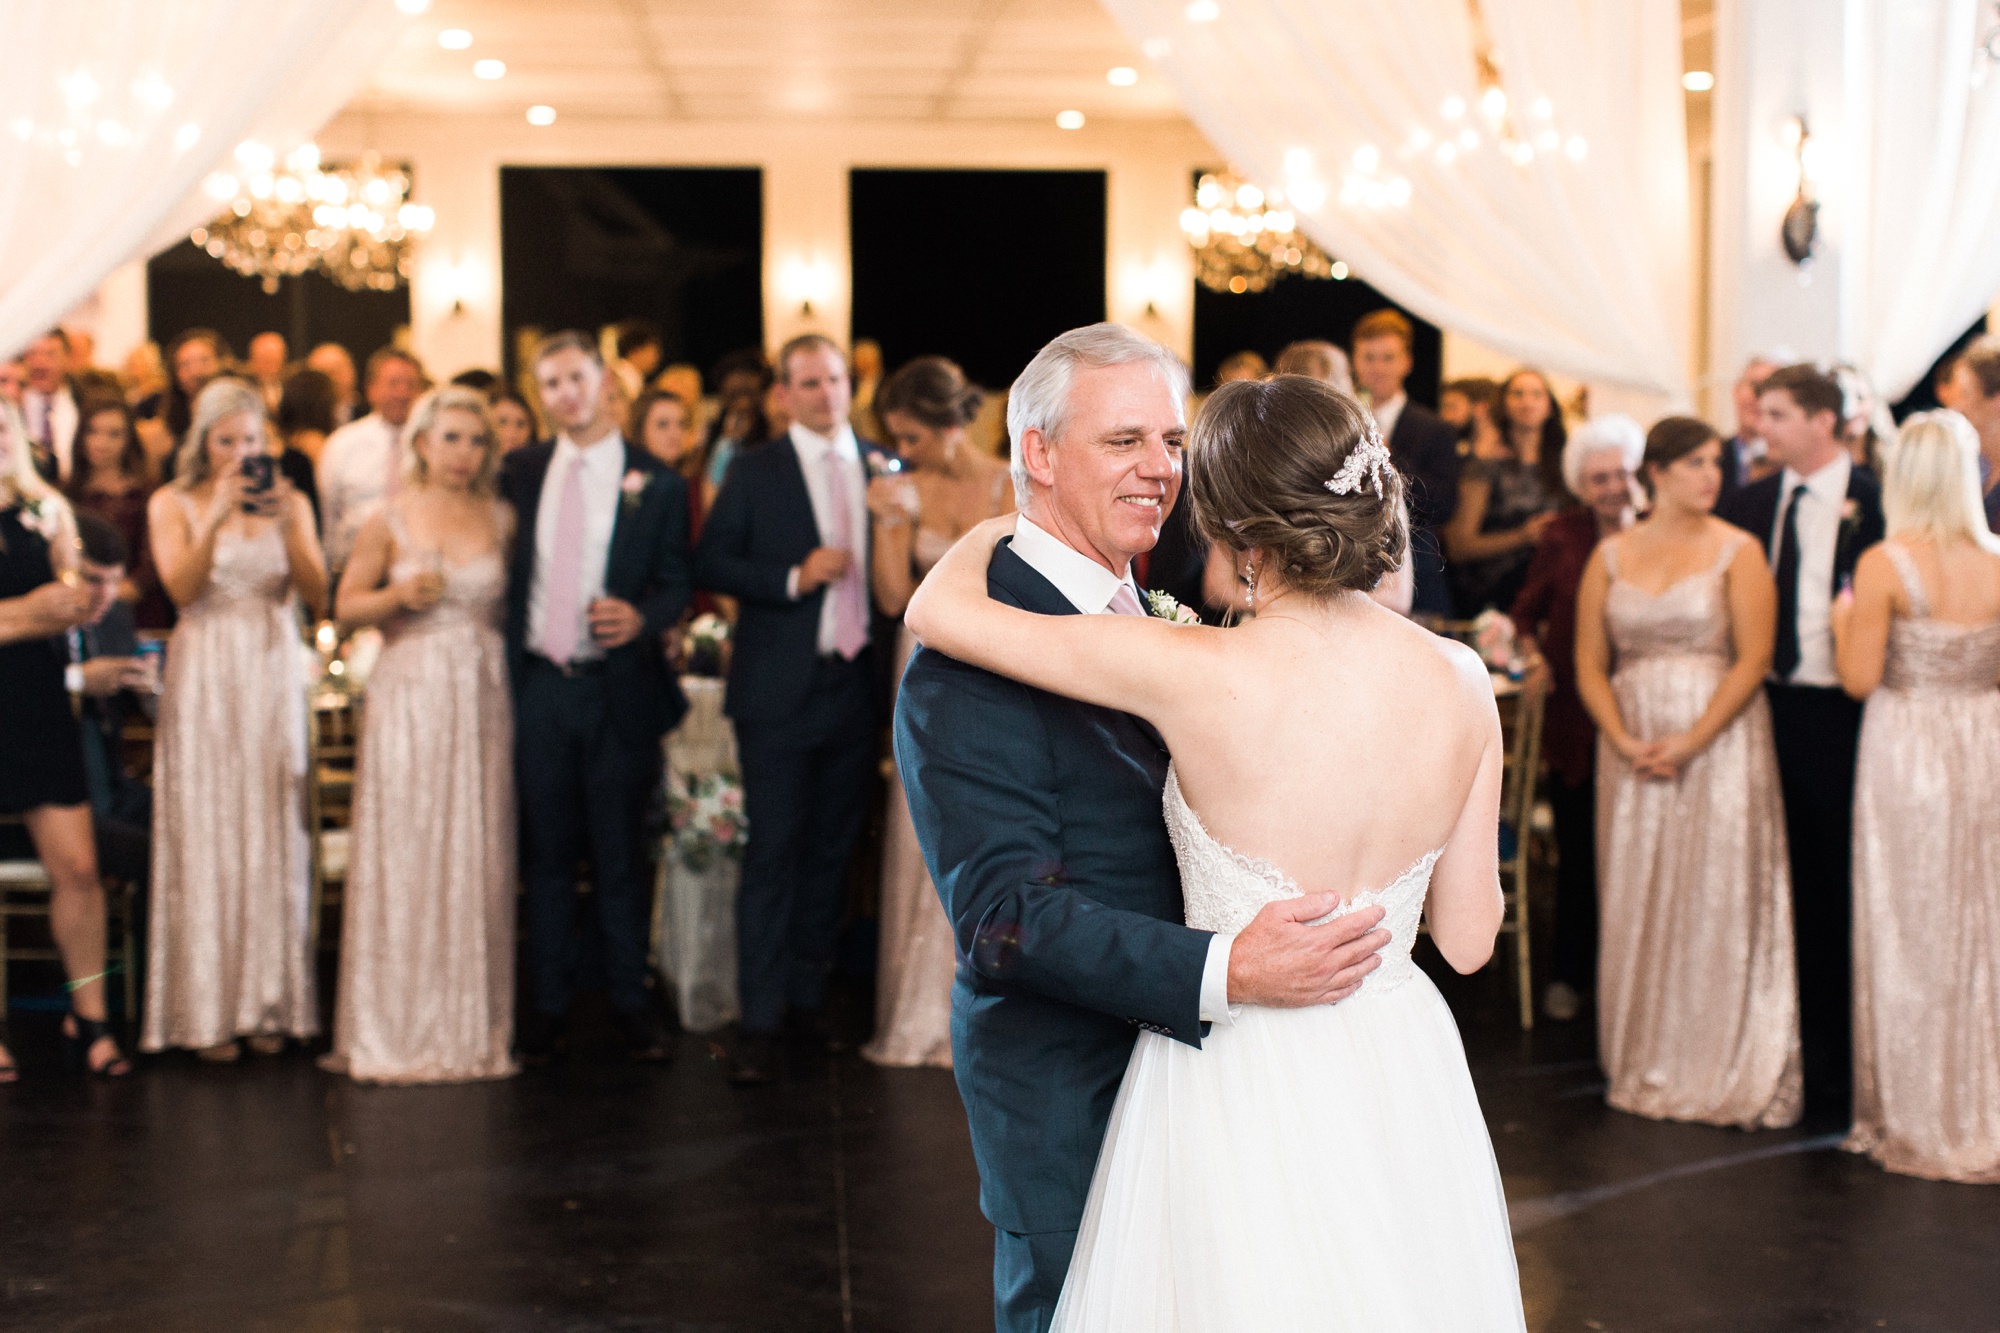 Father Daughter dances give me all the feels.